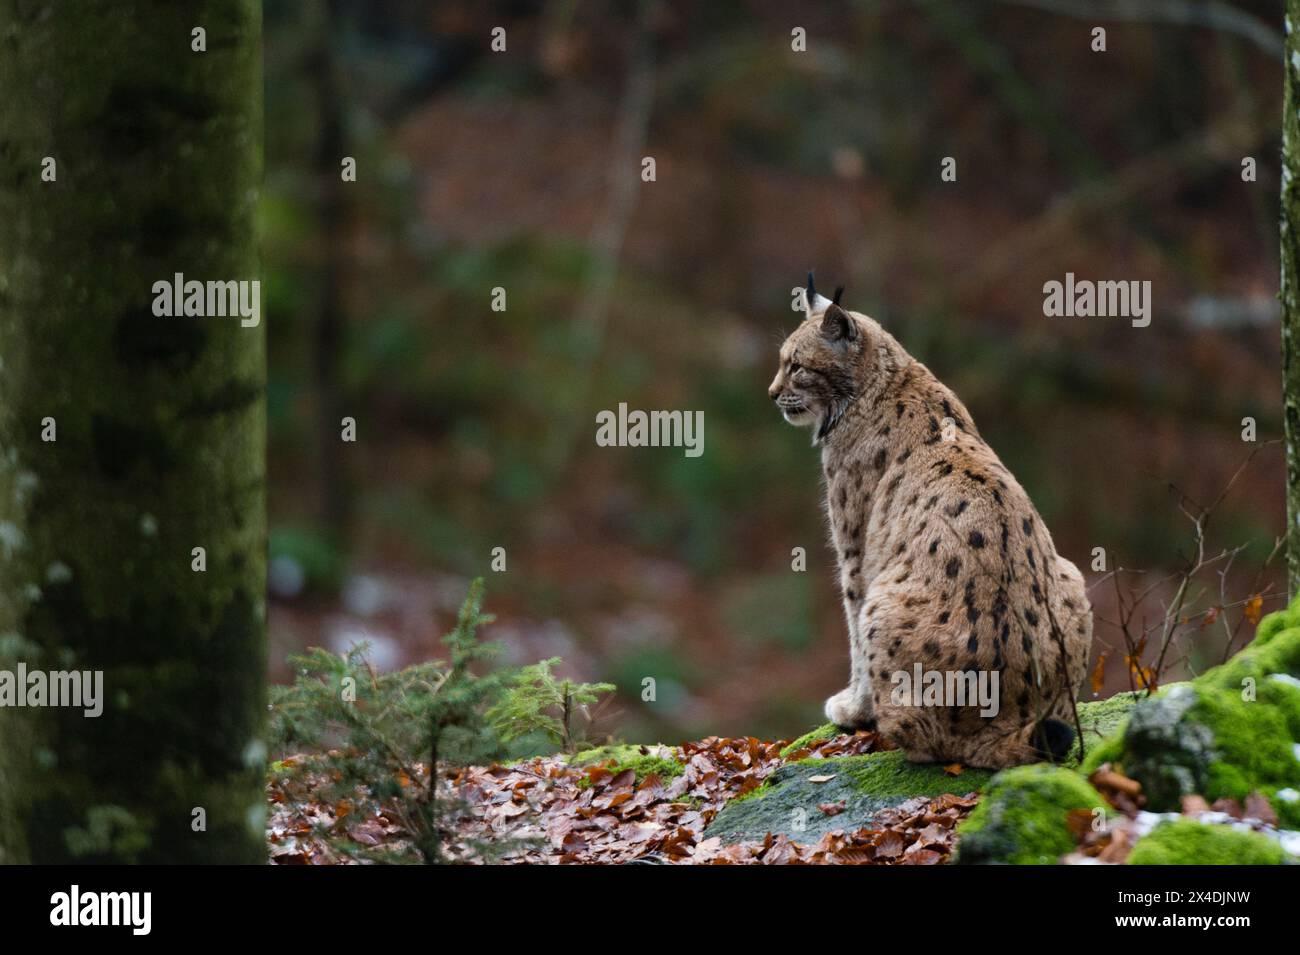 A European lynx, sitting on a mossy rock in a forest. Bayerischer Wald National Park, Bavaria, Germany. Stock Photo